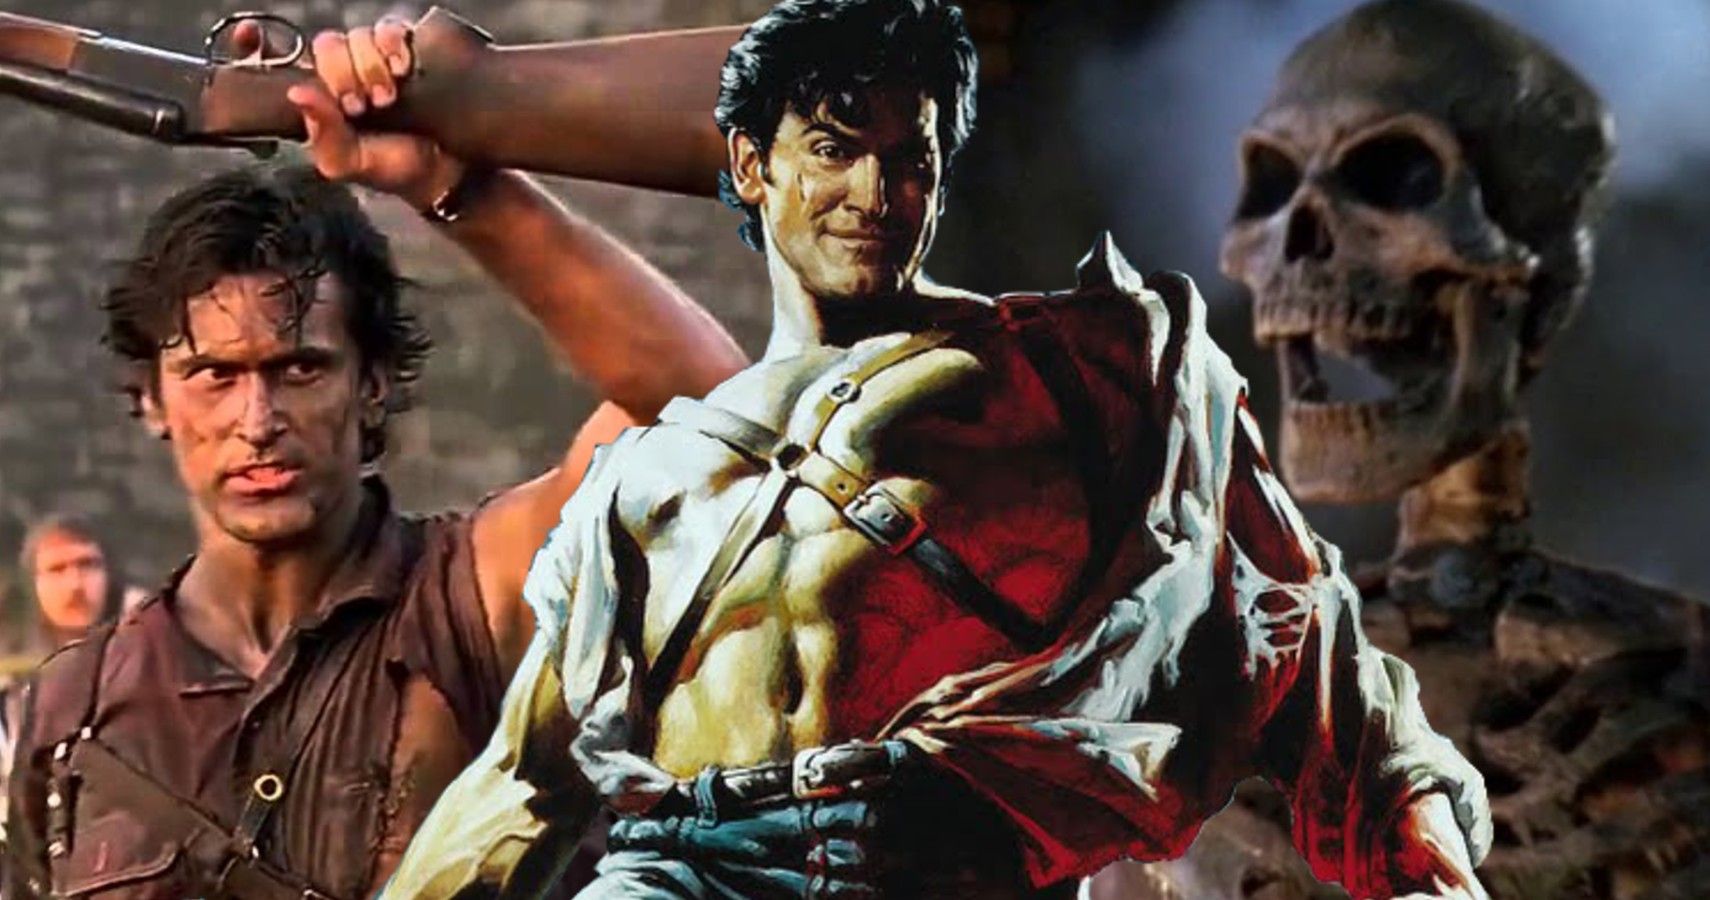 Behind the Scenes of 'Evil Dead 2': Making a Cult Classic – The